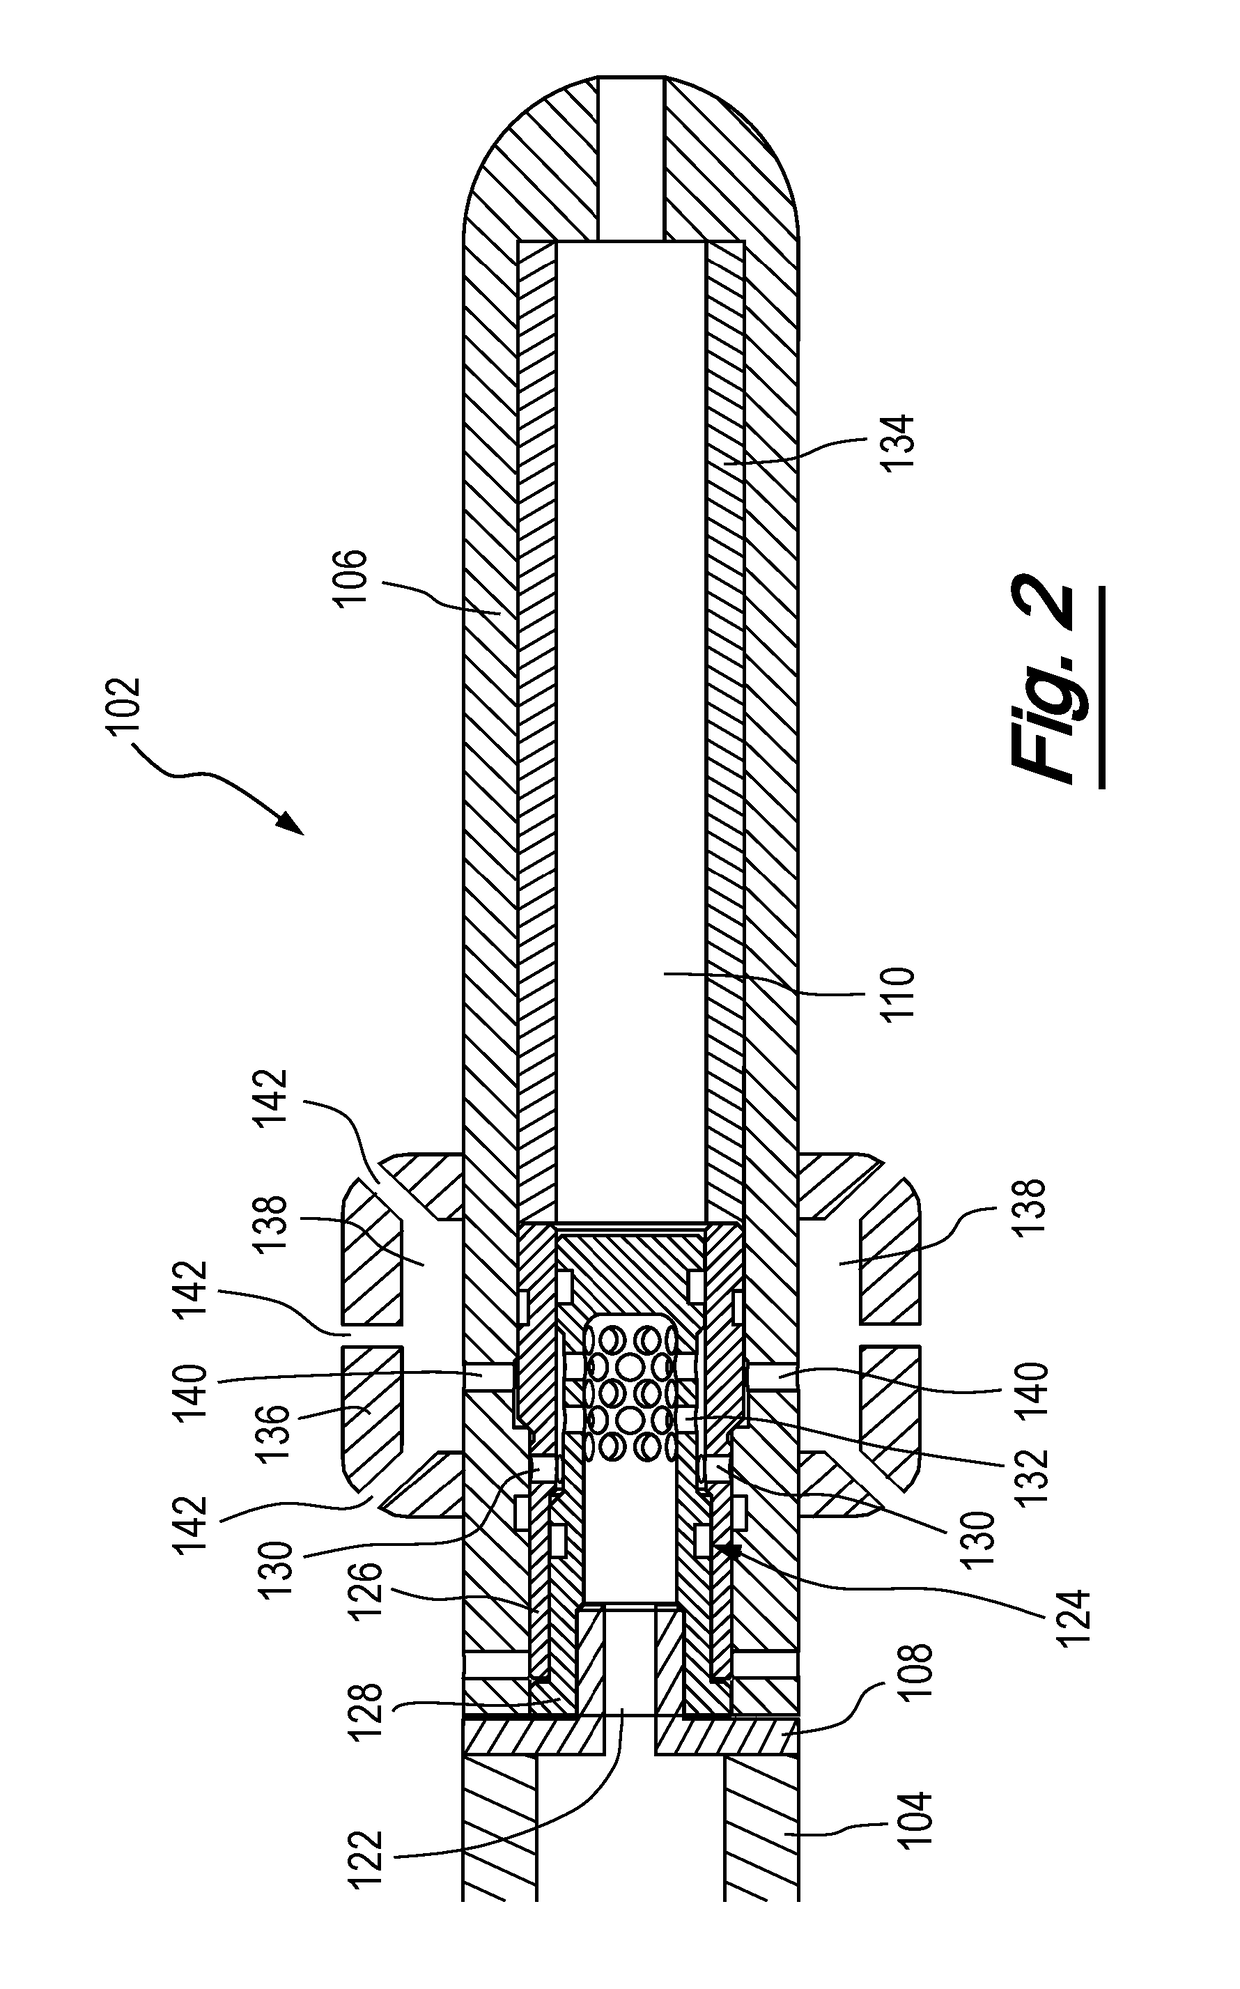 Fluid Discharge Apparatus and Method of Use